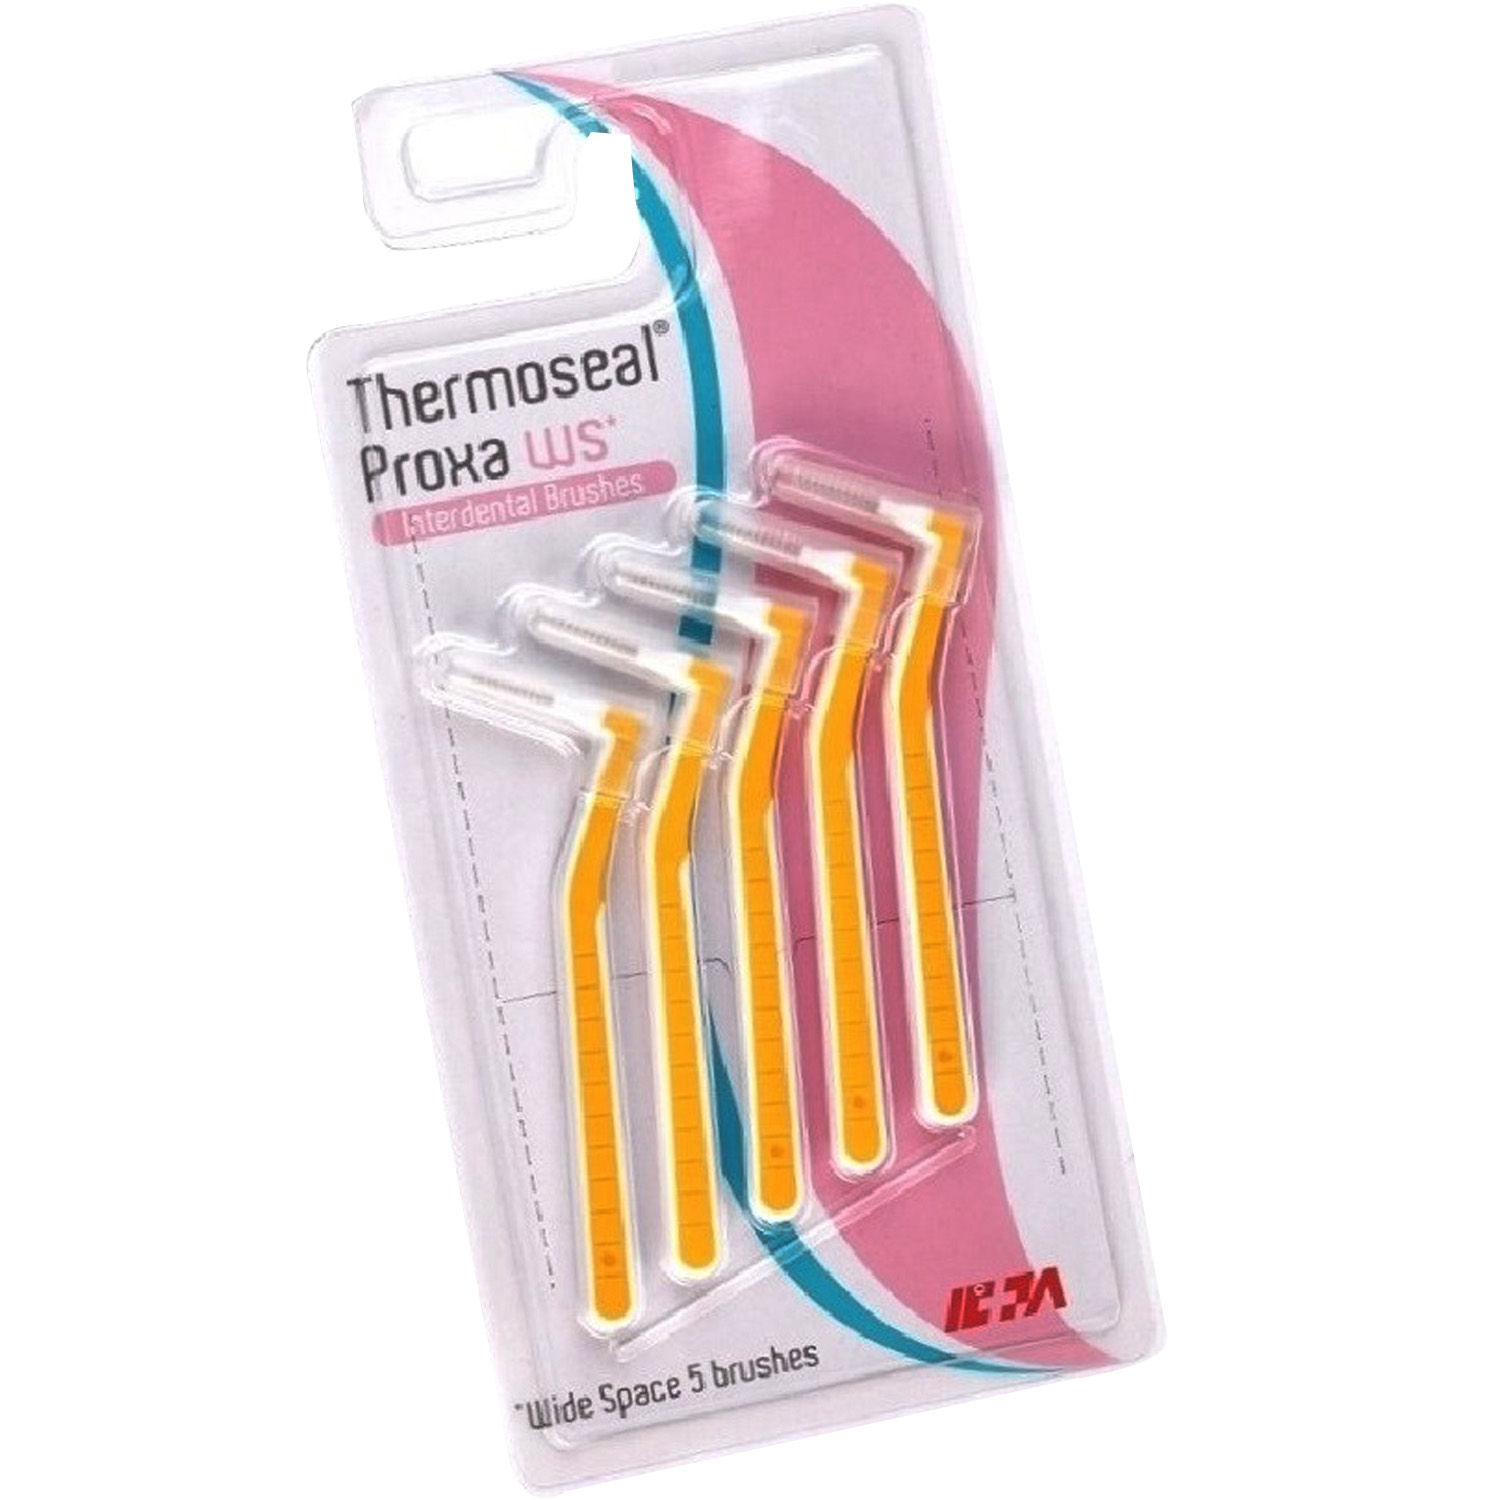 Thermoseal Proxa Wide Space Interdental Brushes, 5 Count, Pack of 1 